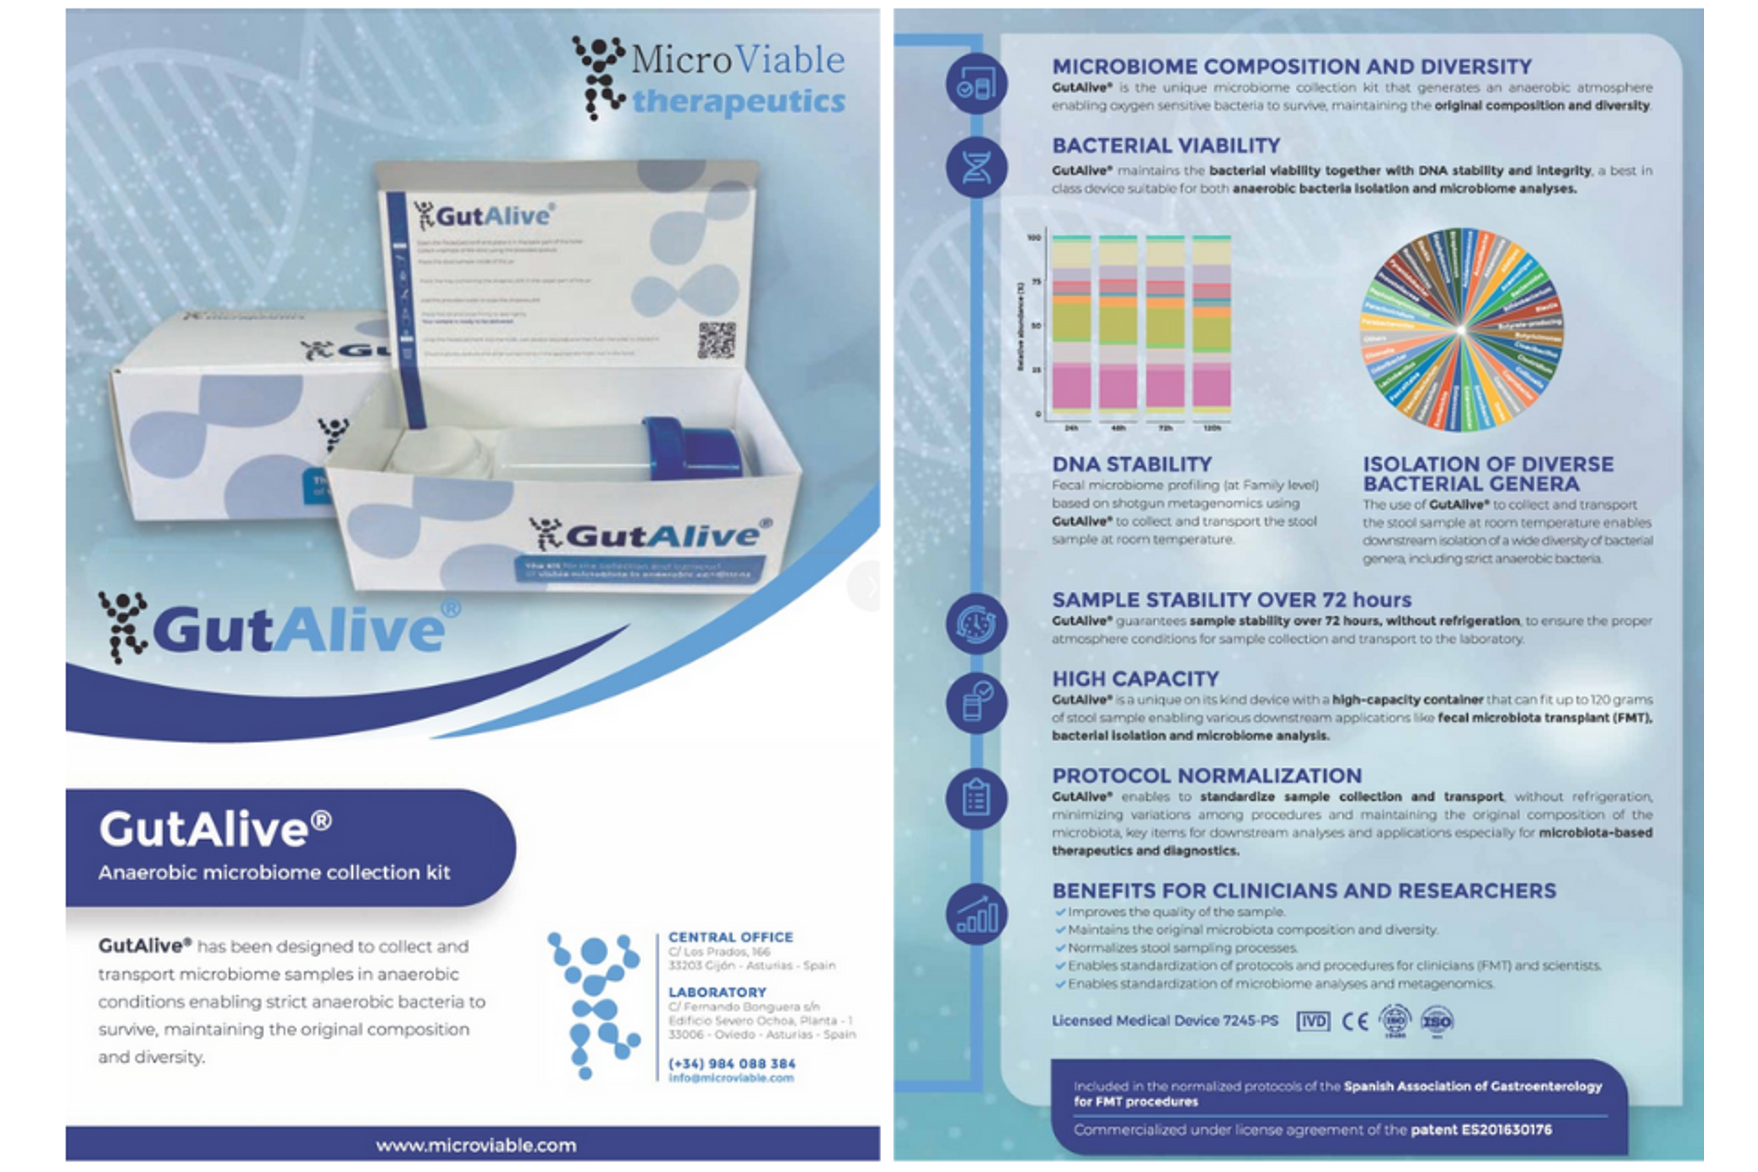 Microviable signed an agreement with Deltalab for the distribution of GutAlive kit, designed for the collection and transport of microbiota.